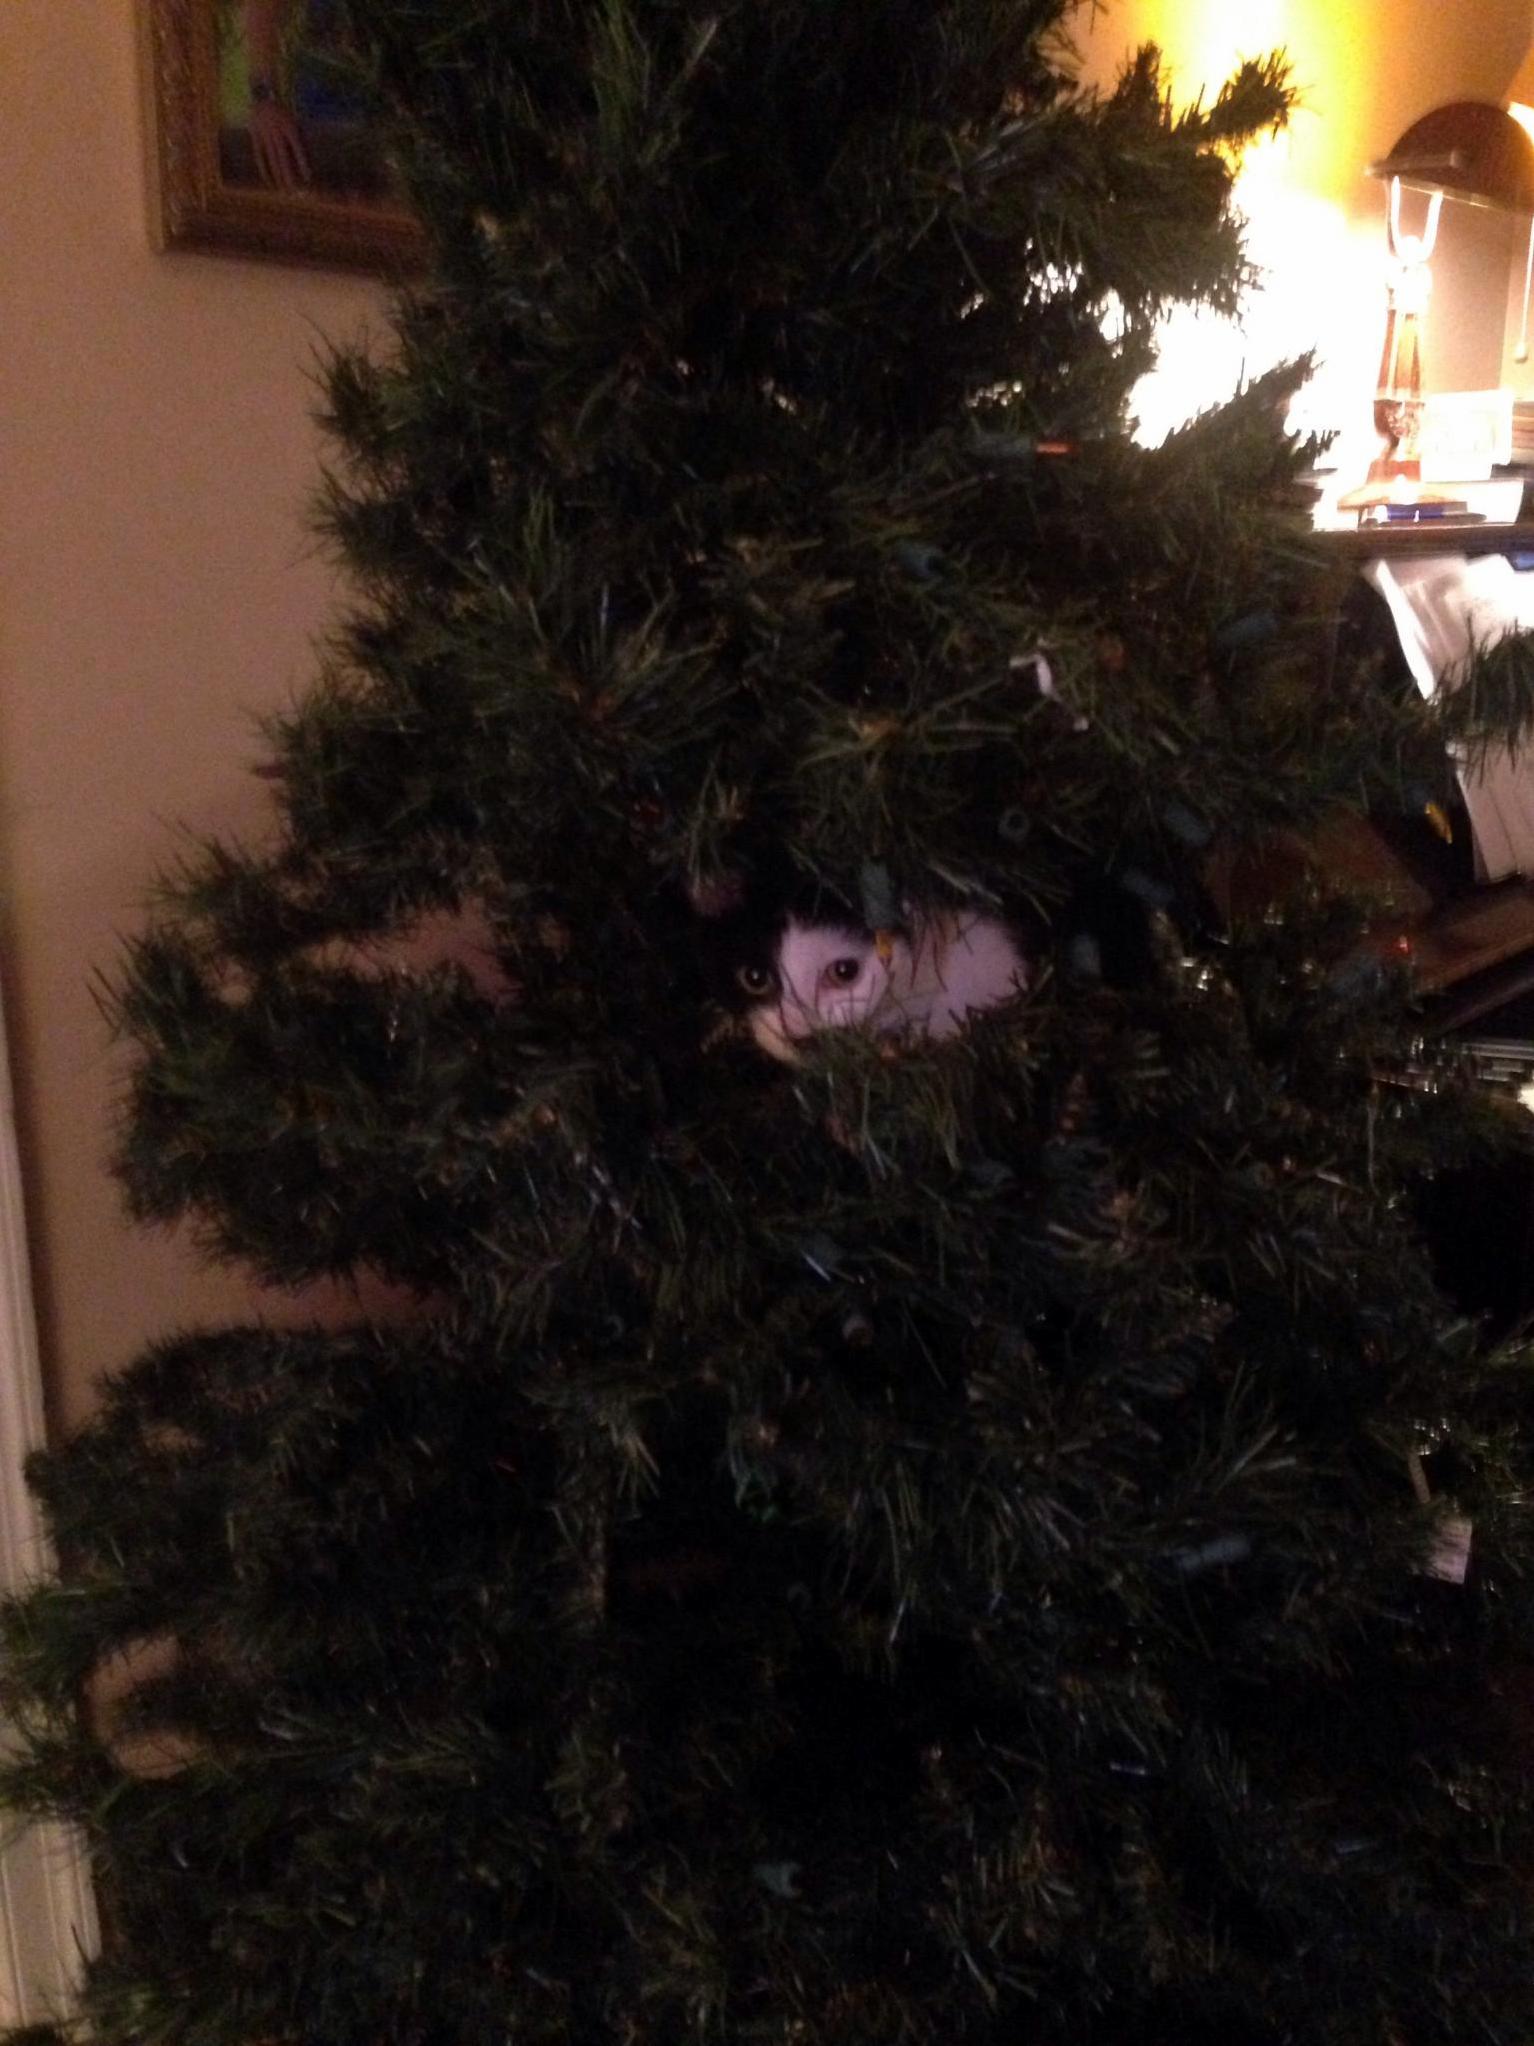 After putting up the decorations yesterday we found our new kitten asleep in the christmas tree this morning